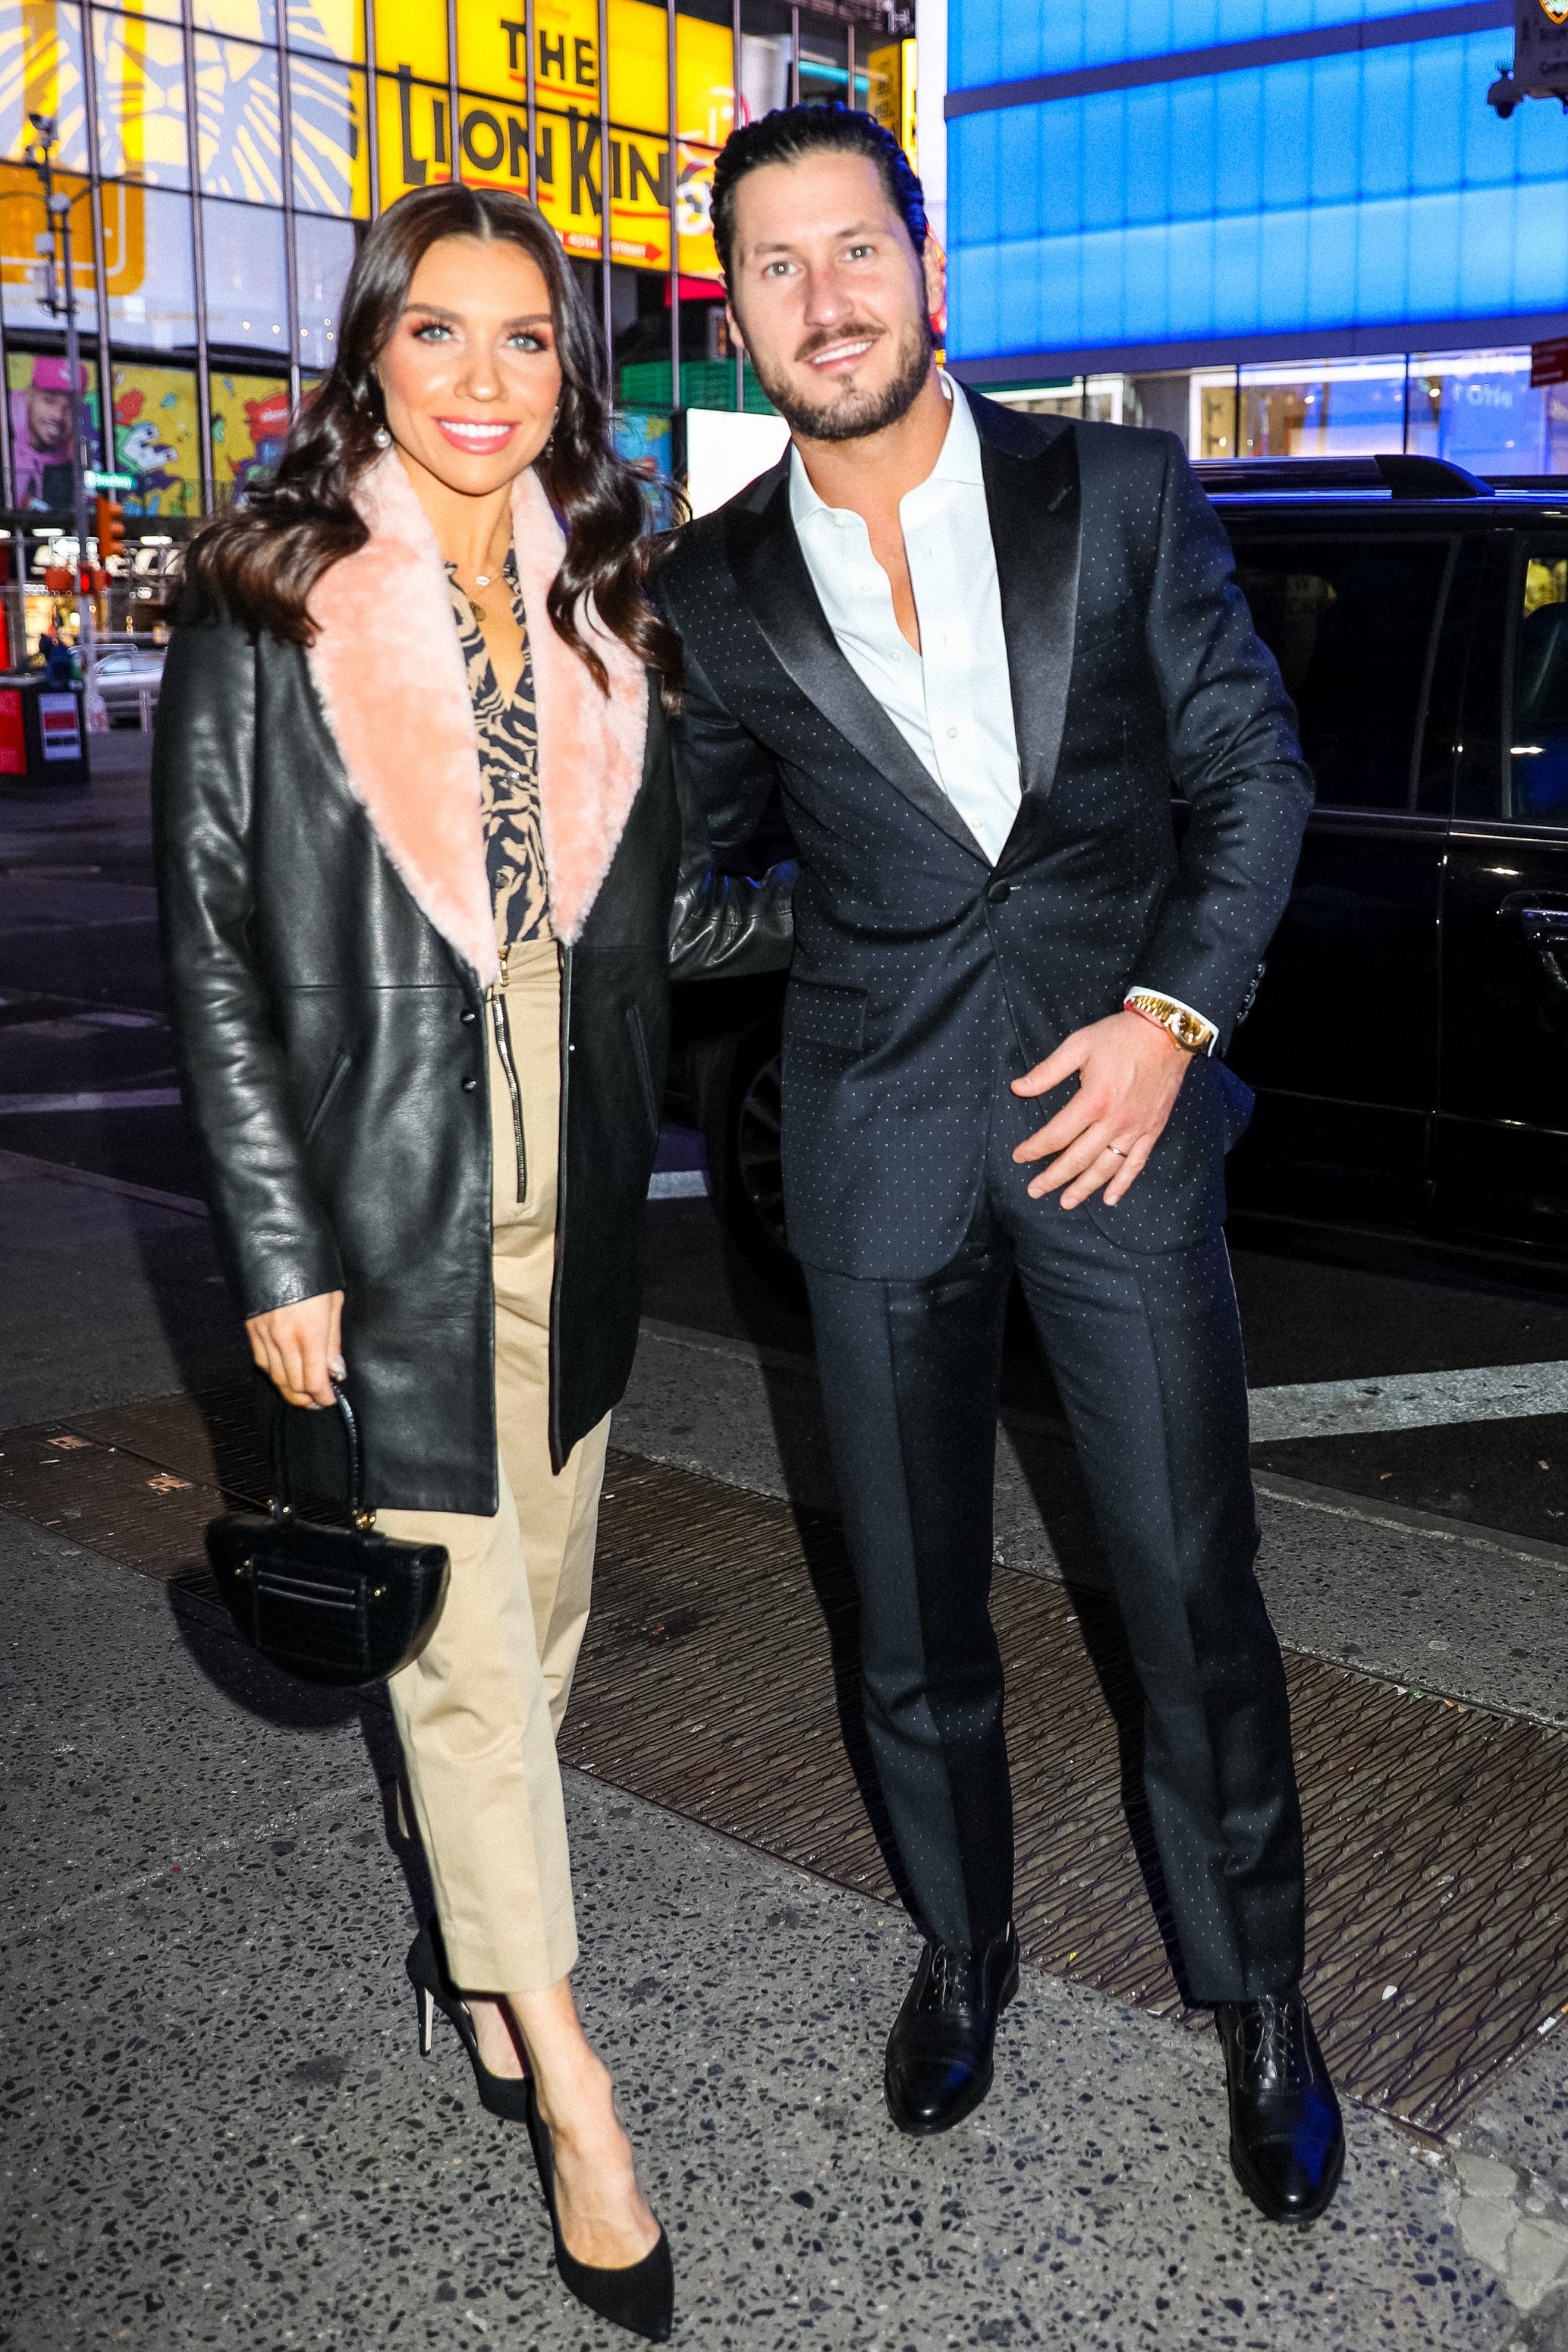  Valentin Chmerkovskiy and Jenna Johnson are seen arriving at 'Good Morning America' on March 10, 2020 in New York City | Source: Getty Images